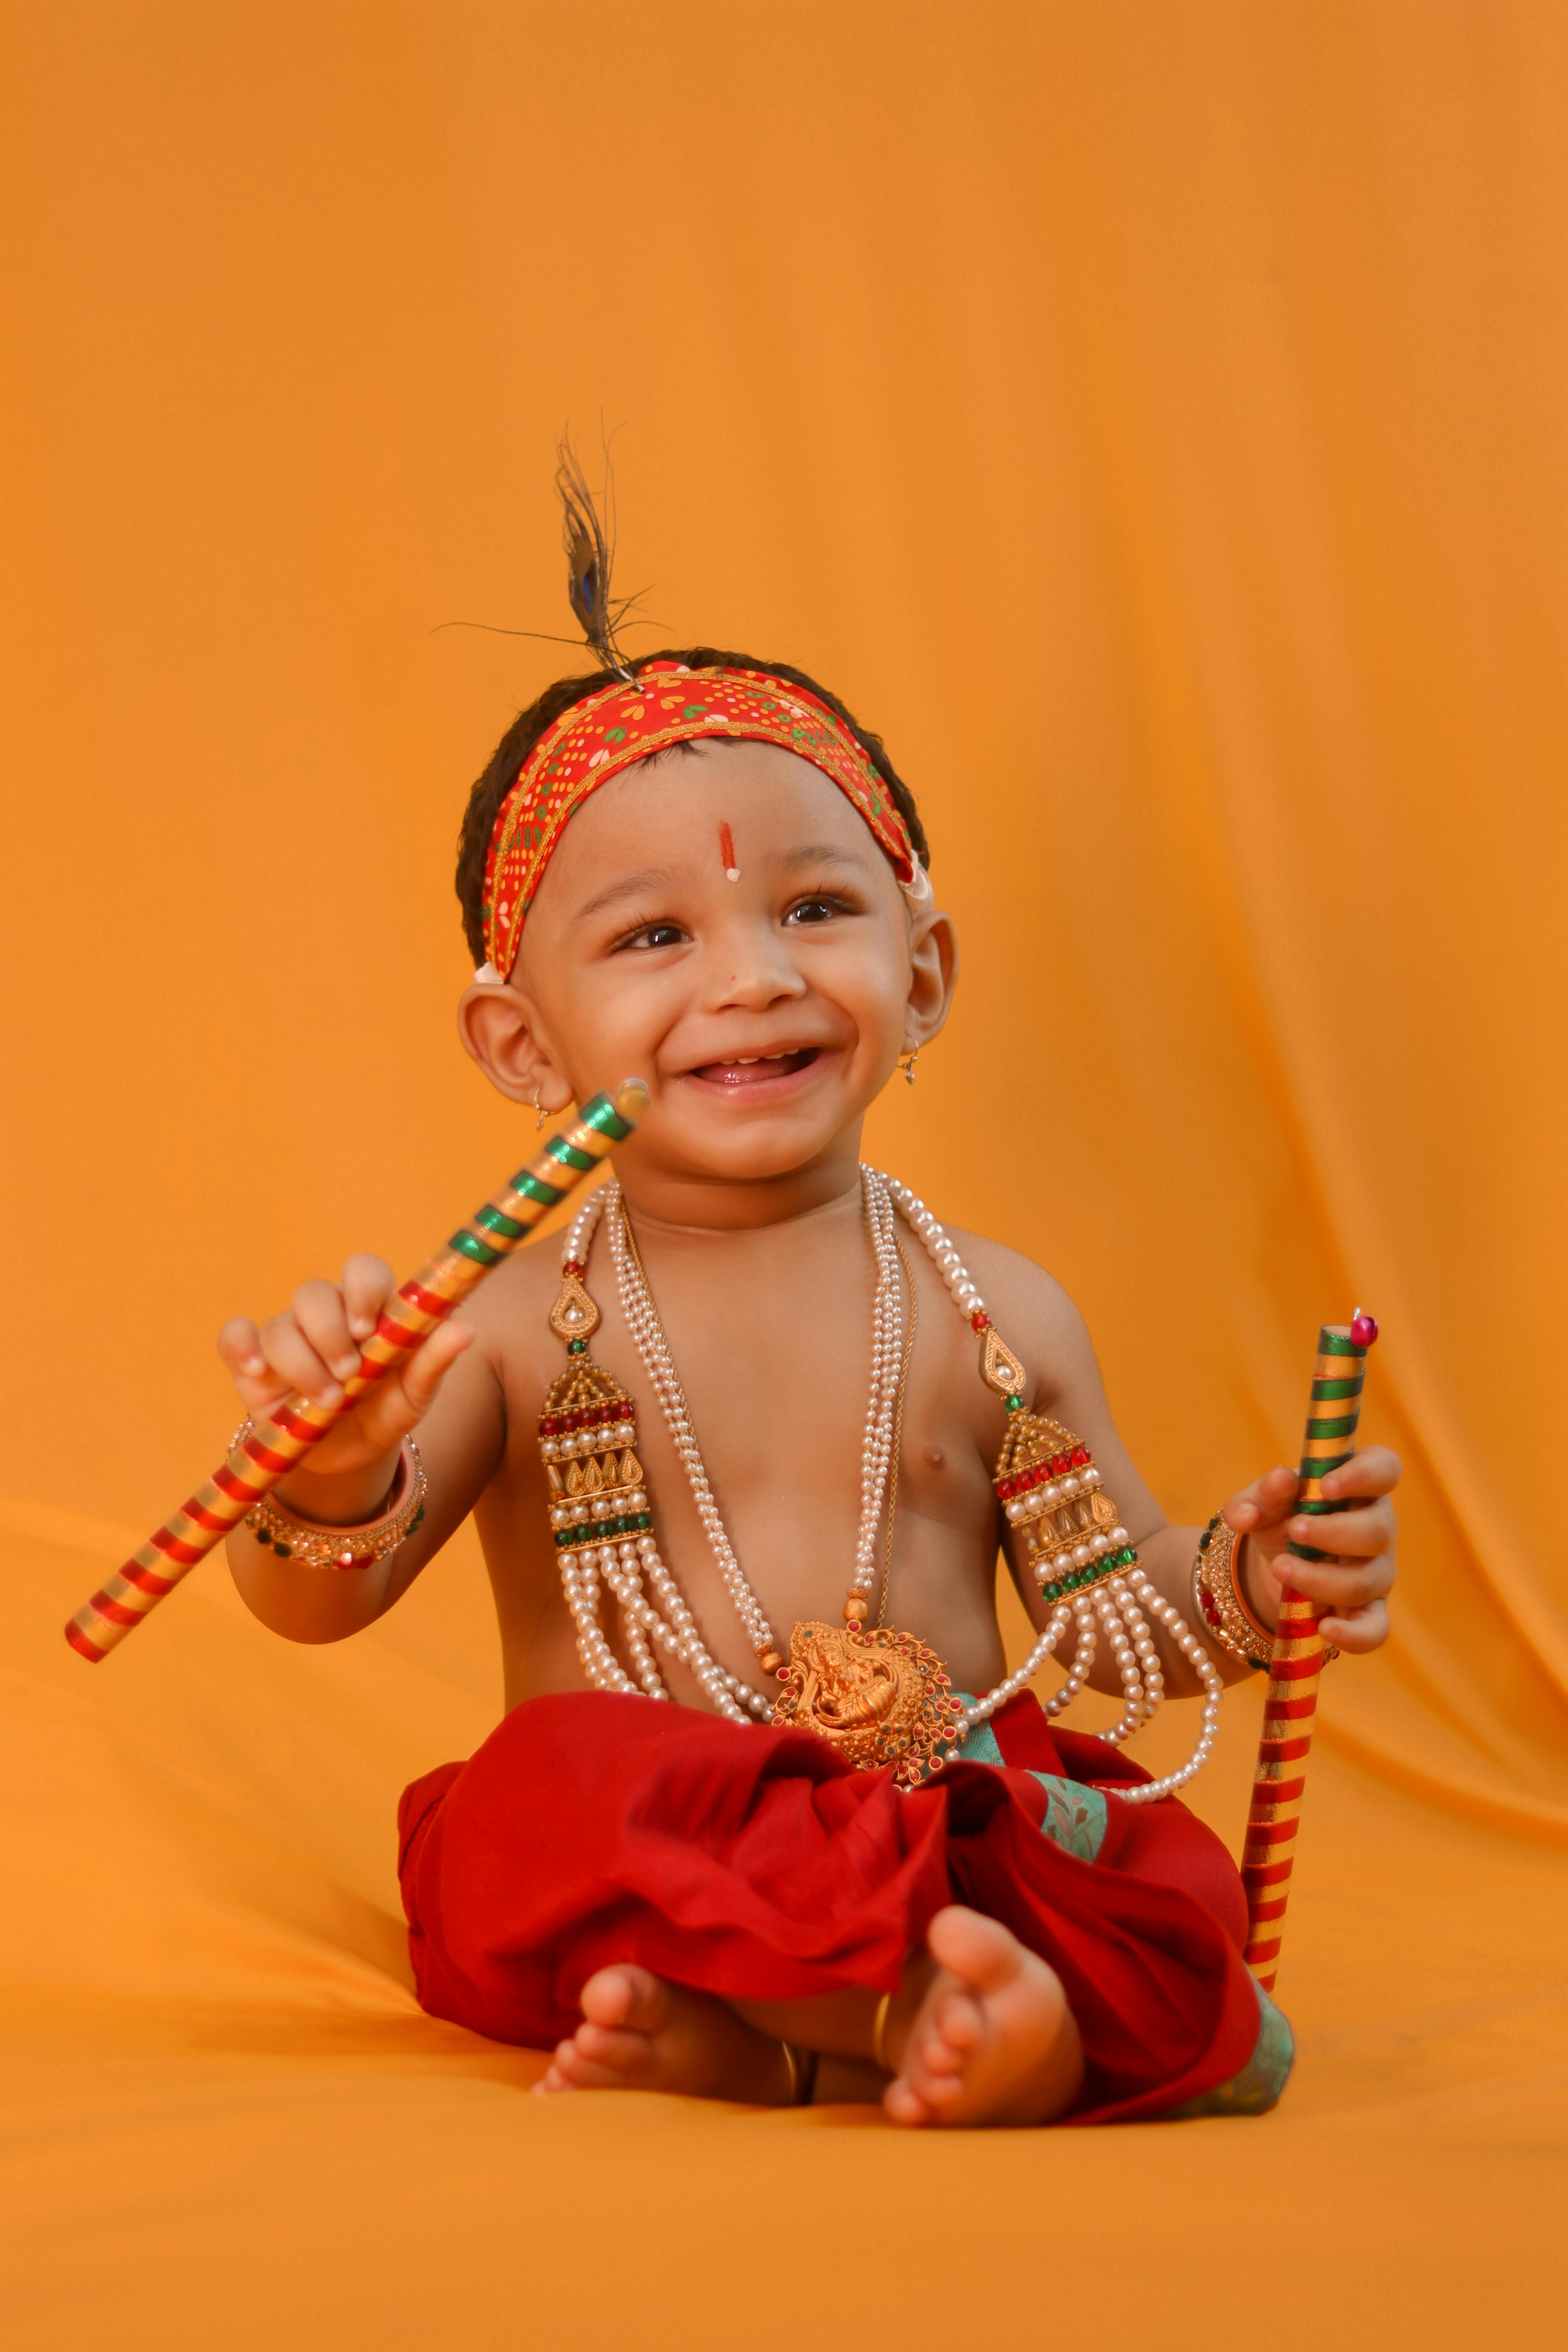 7 Tips to Dress Your Baby in Krishna Dress - Paperblog | Cute baby photos,  Indian baby, Baby photoshoot boy